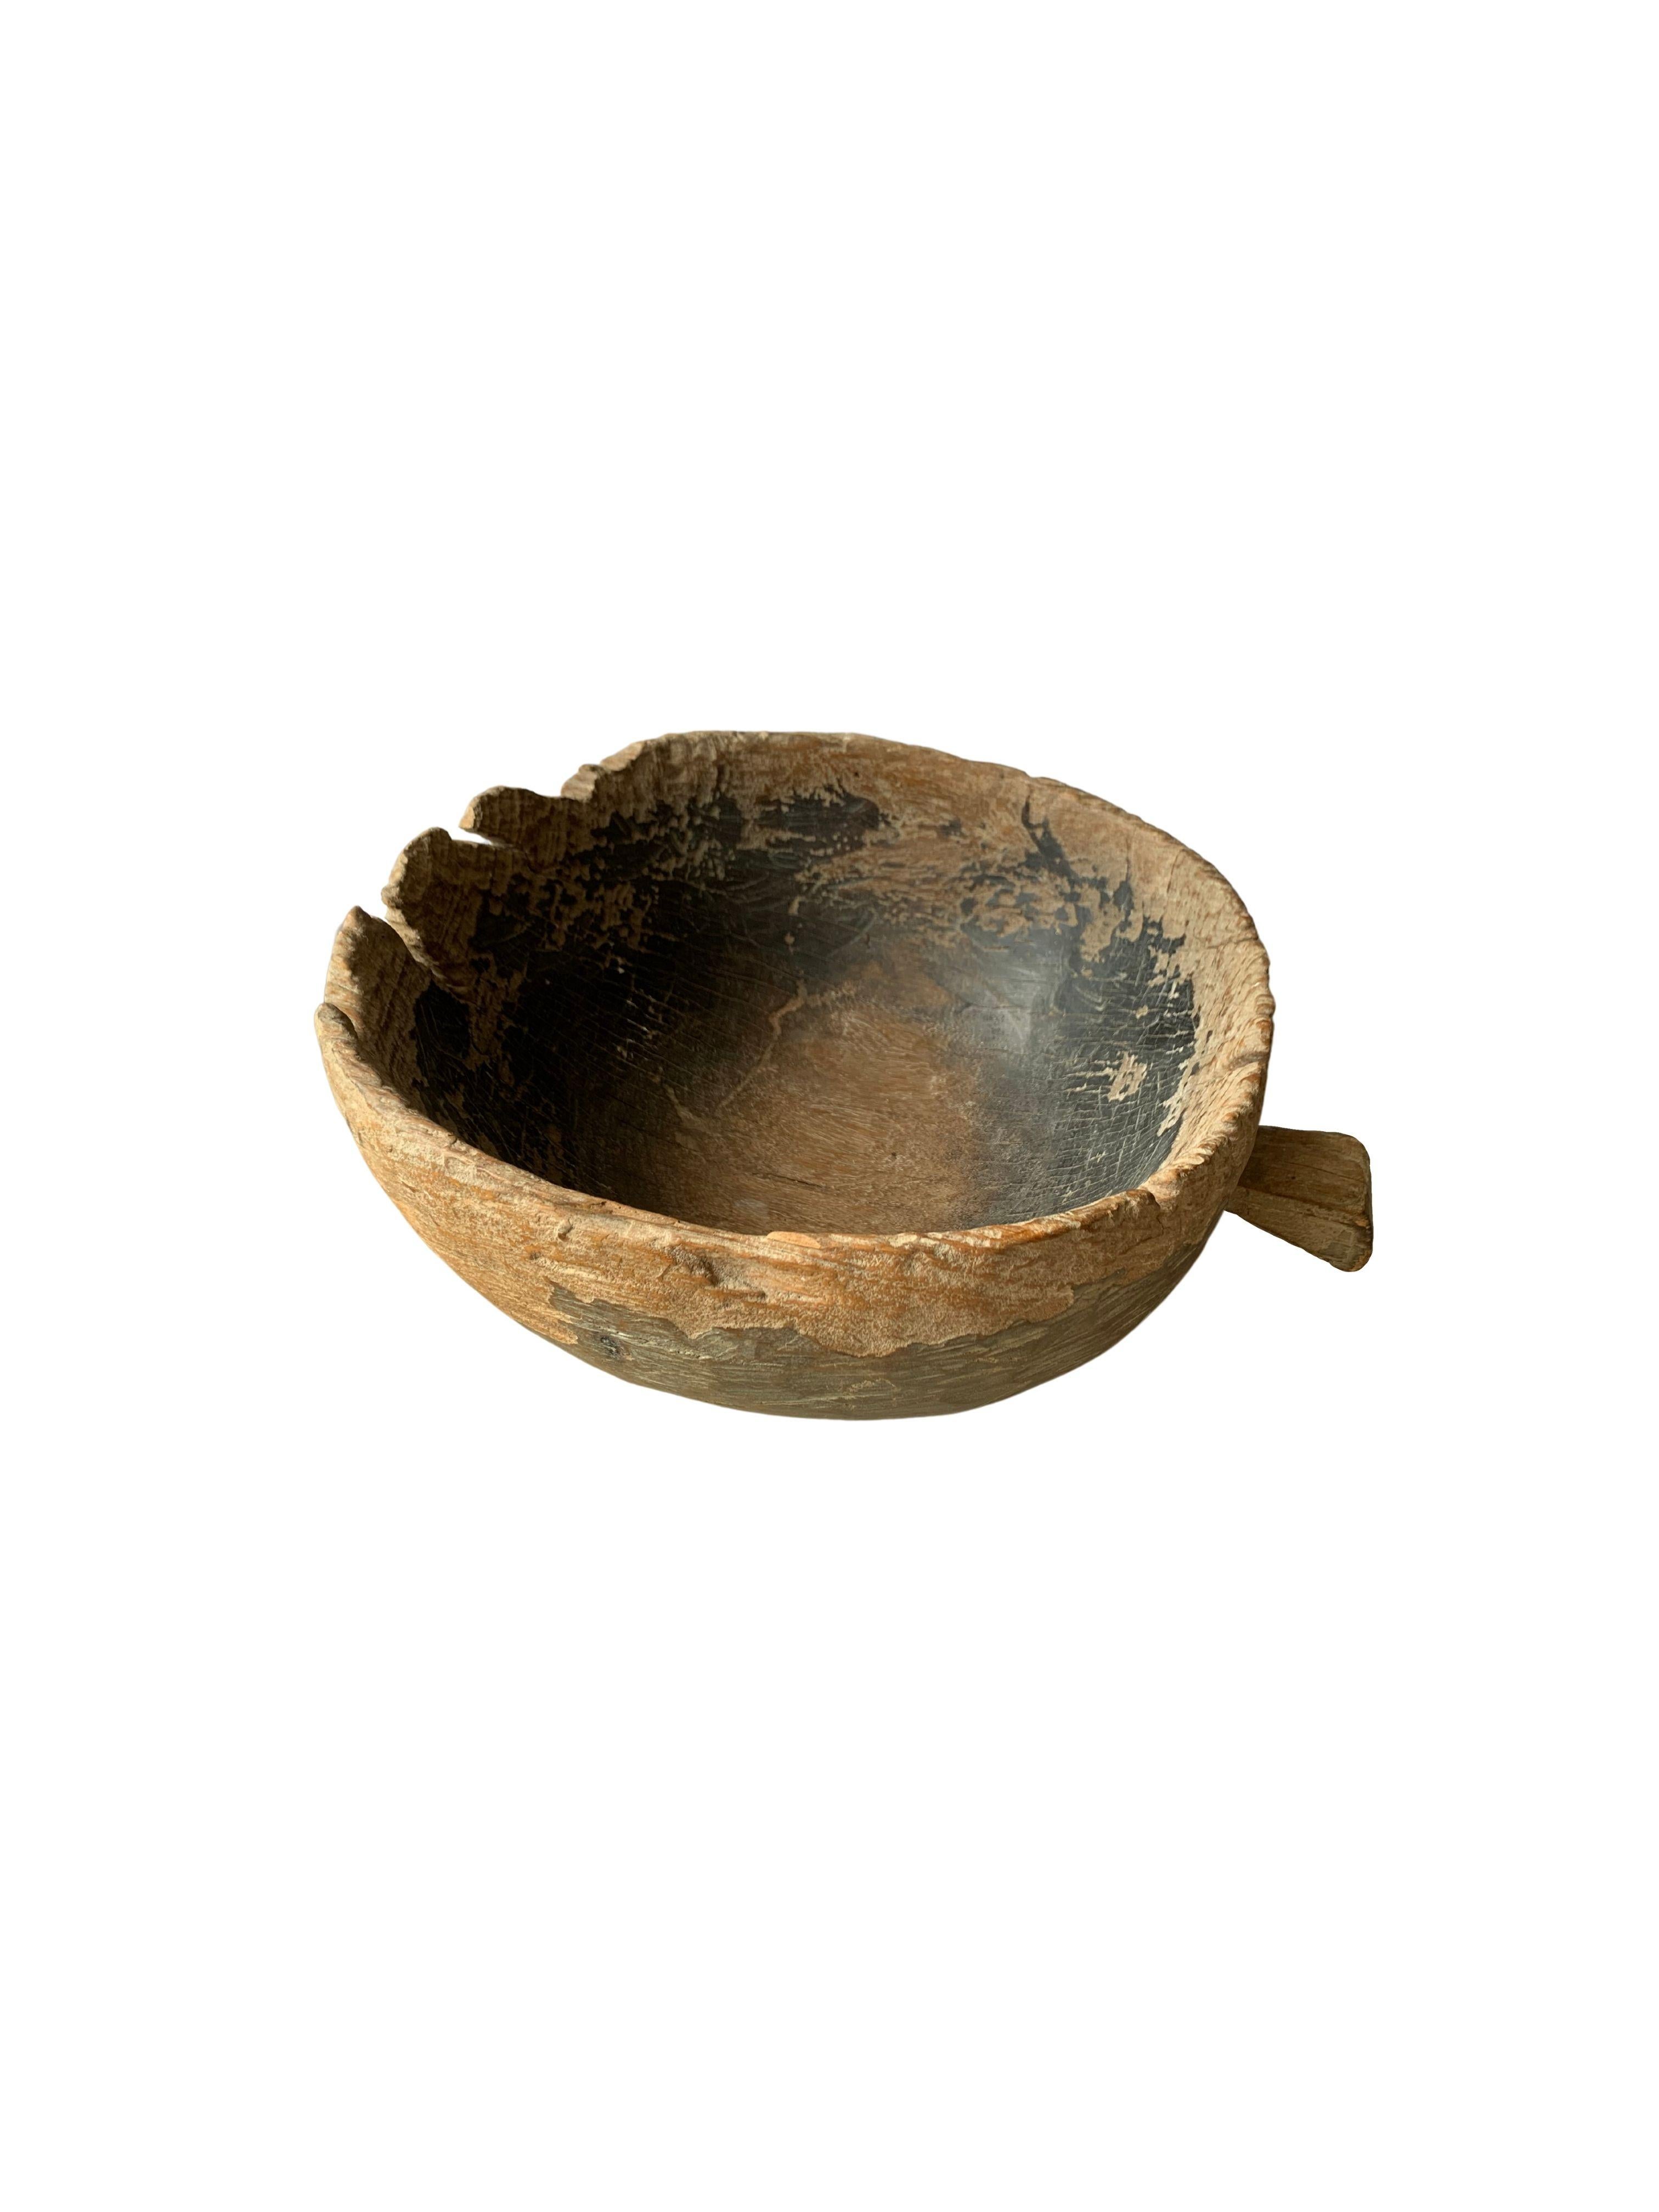 Indonesian Teak Burl Wood Bowl from Java, Indonesia, Late 19th Century For Sale